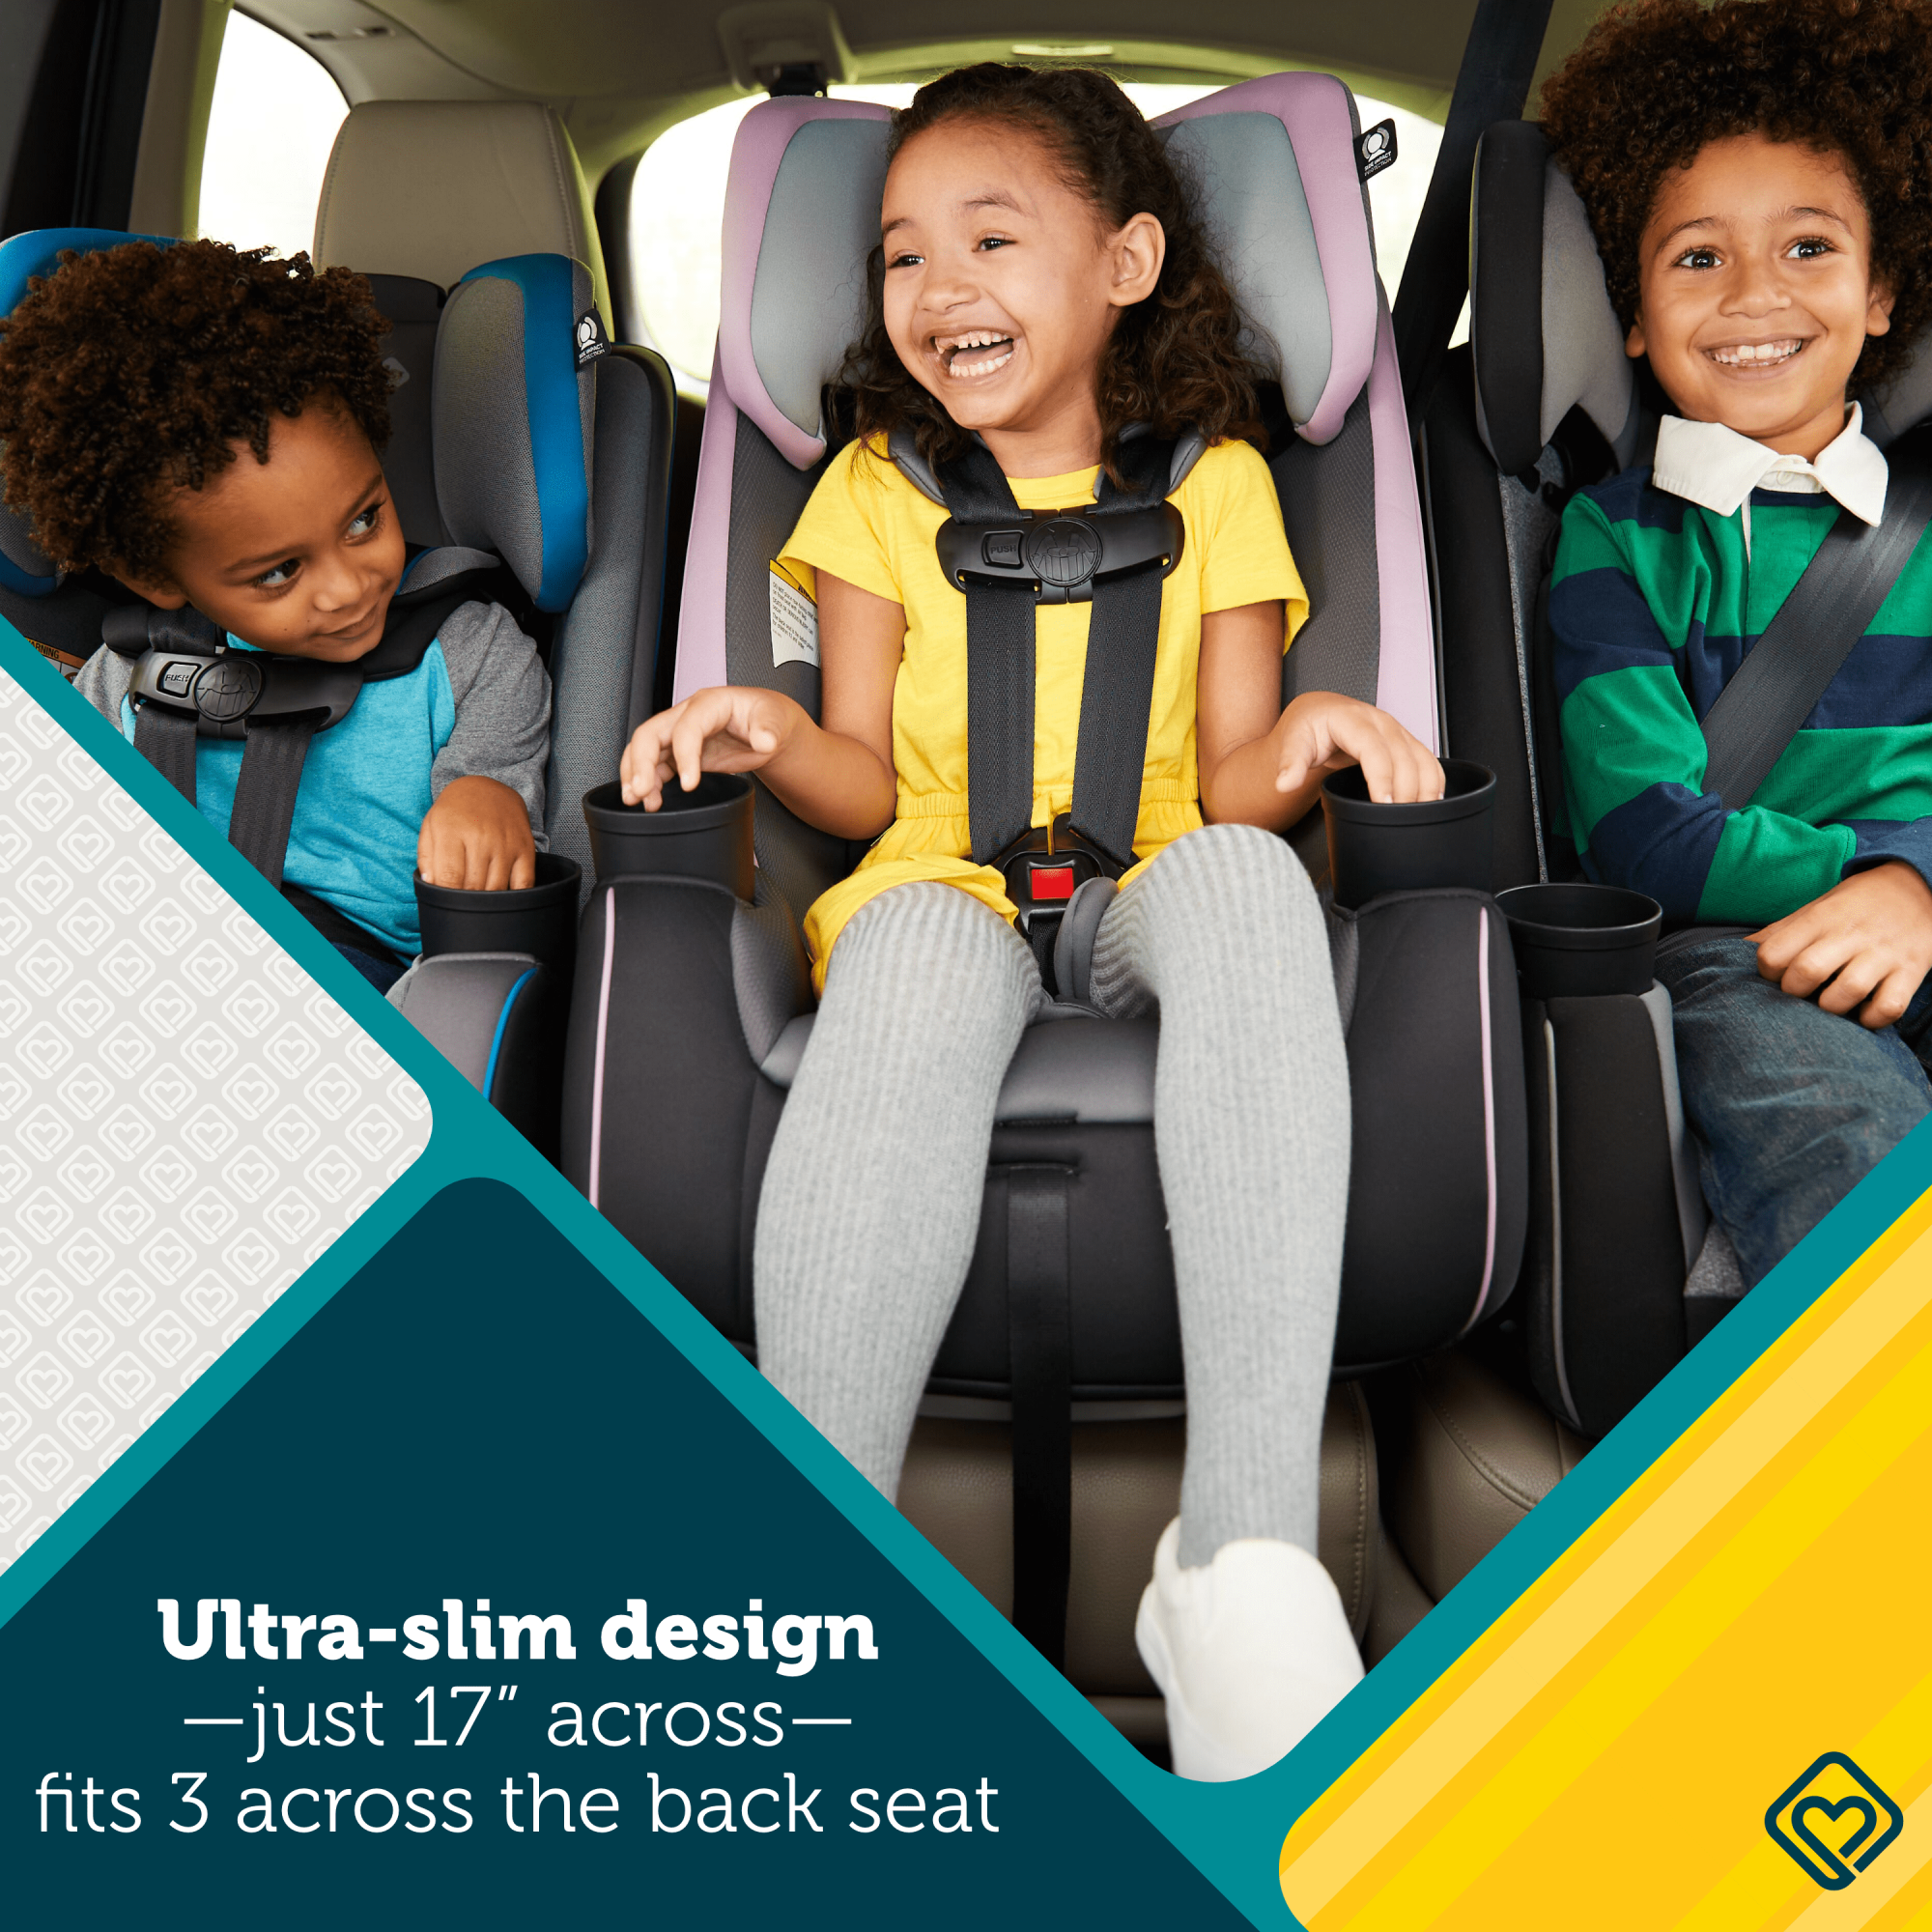 TriMate™ All-in-One Convertible Car Seat - 1-hand adjustable 9-position headrest and harness system